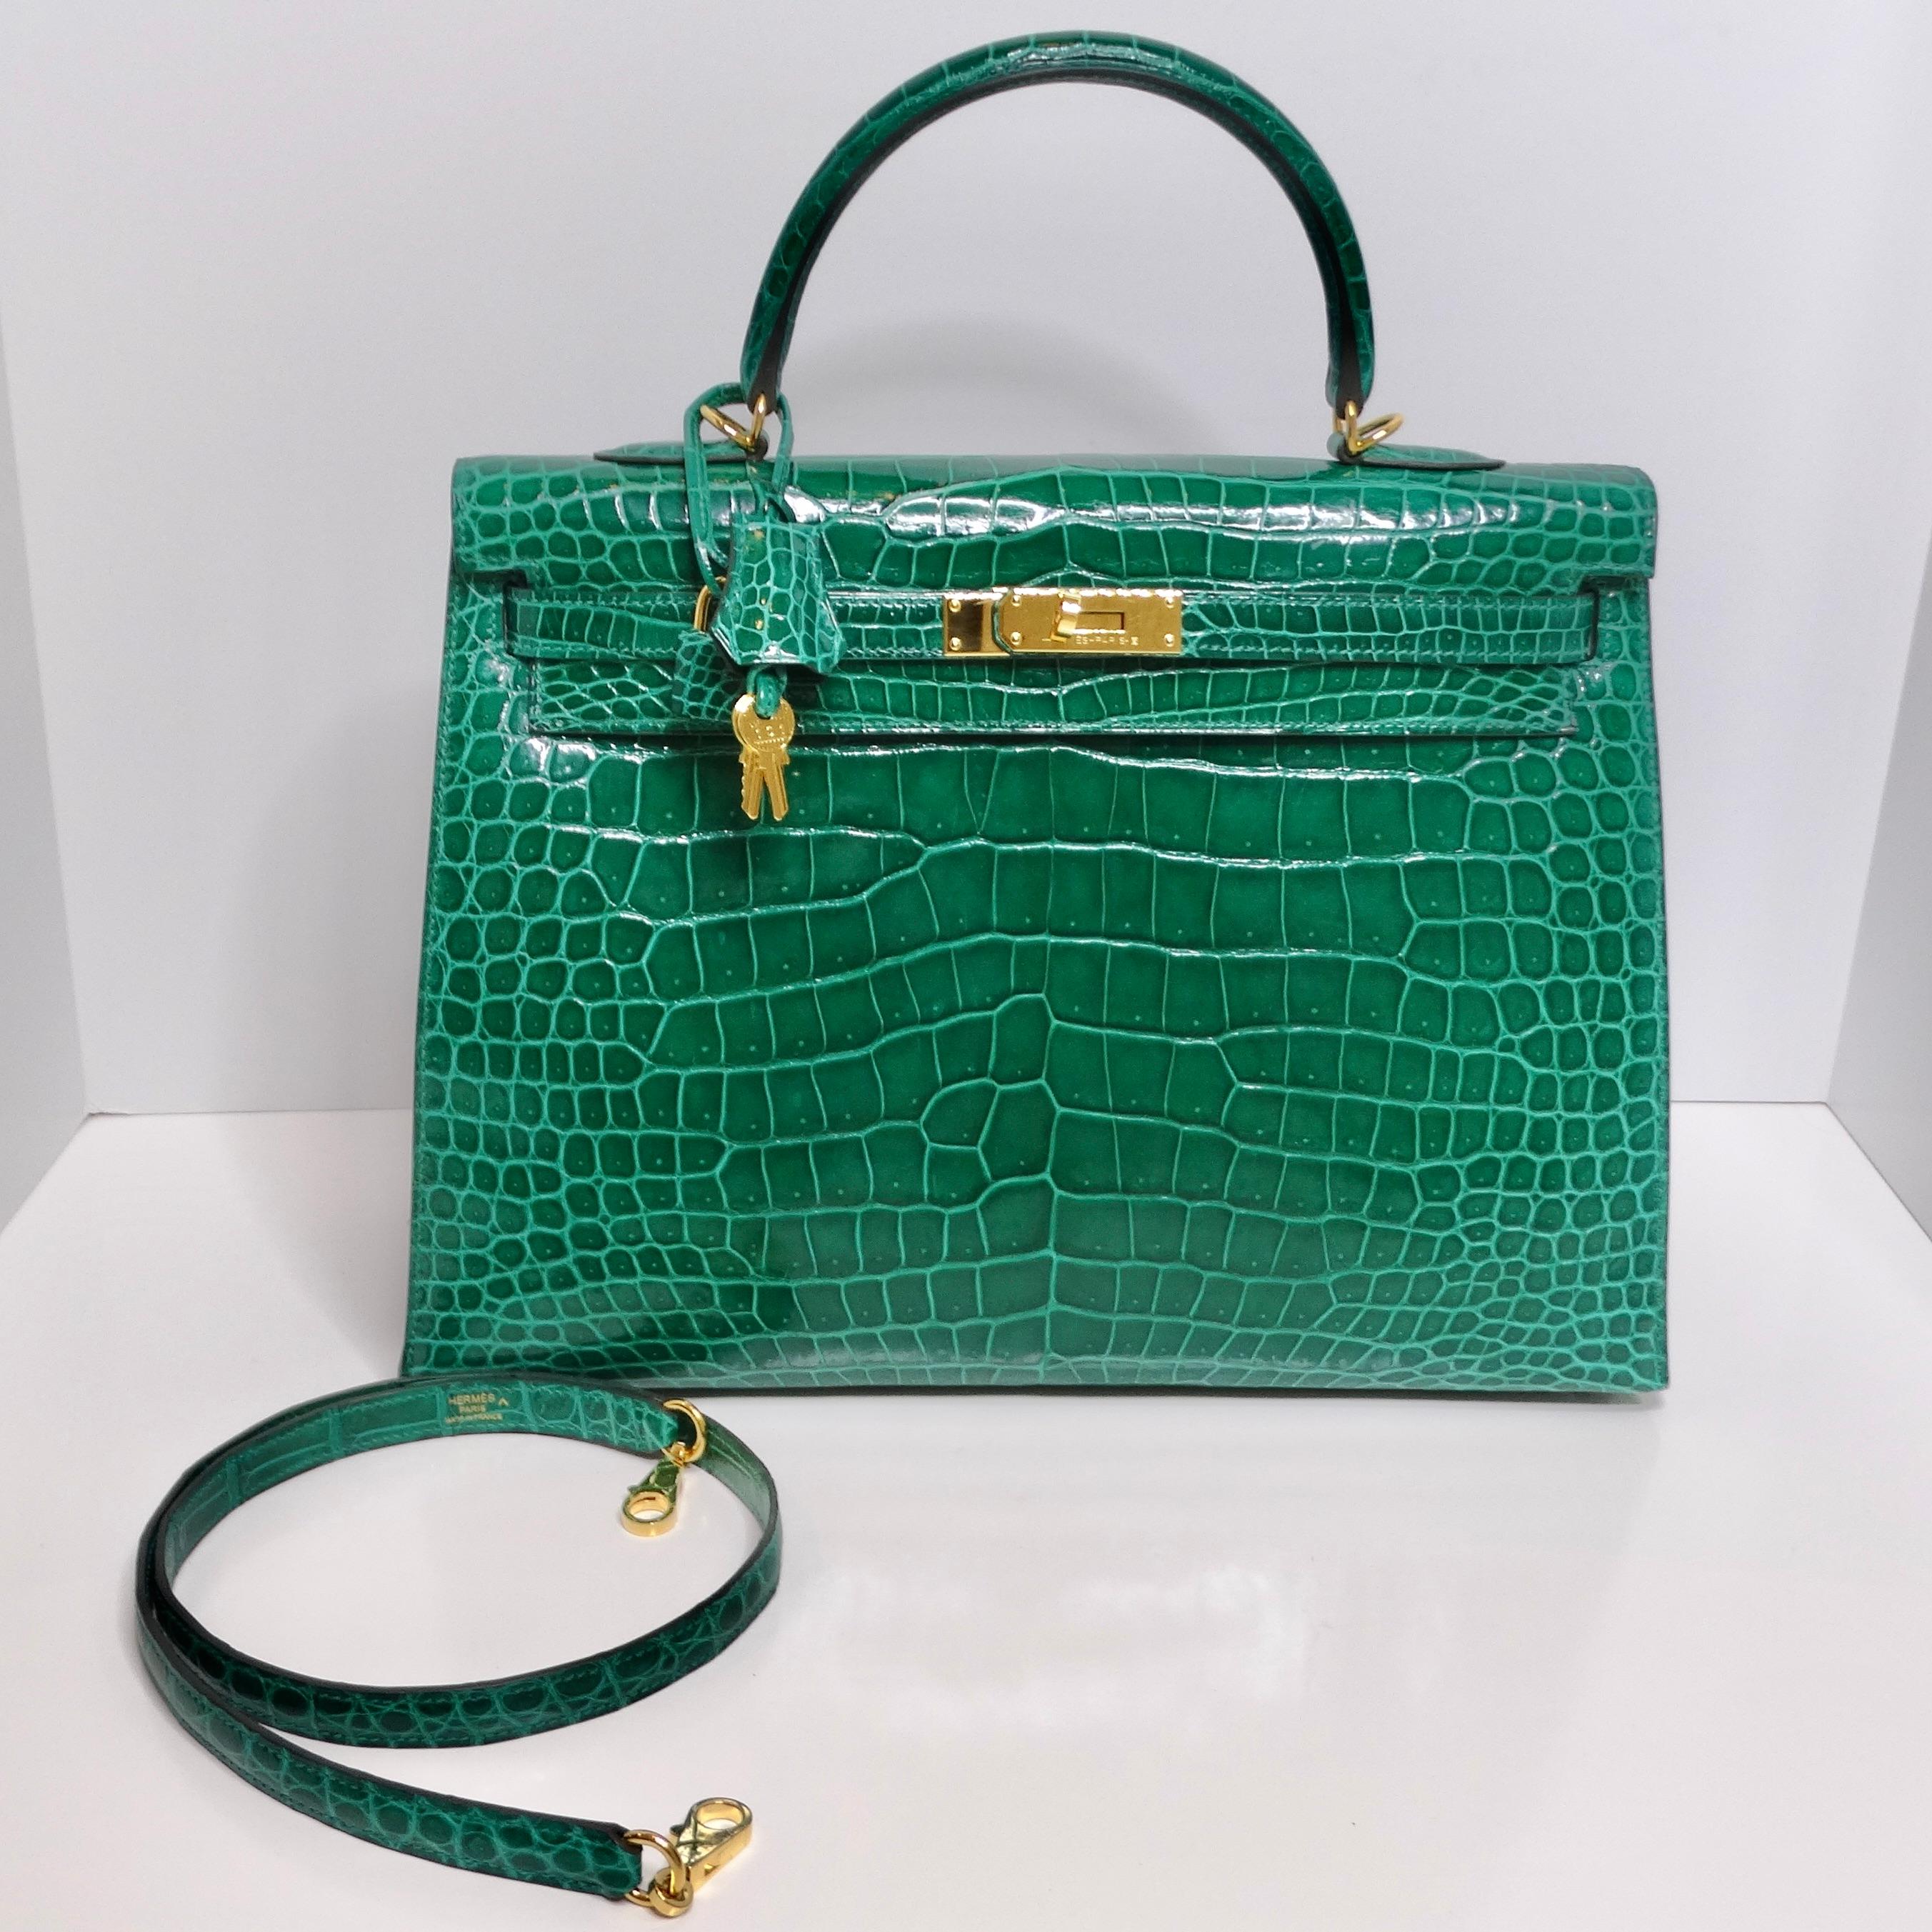 Introducing the epitome of luxury and sophistication, the Hermes Kelly 34 Malachite Shiny Crocodile Porosus Gold Hardware handbag. Crafted in 2018, this iconic handbag is a testament to Hermes' impeccable craftsmanship and timeless design.

This